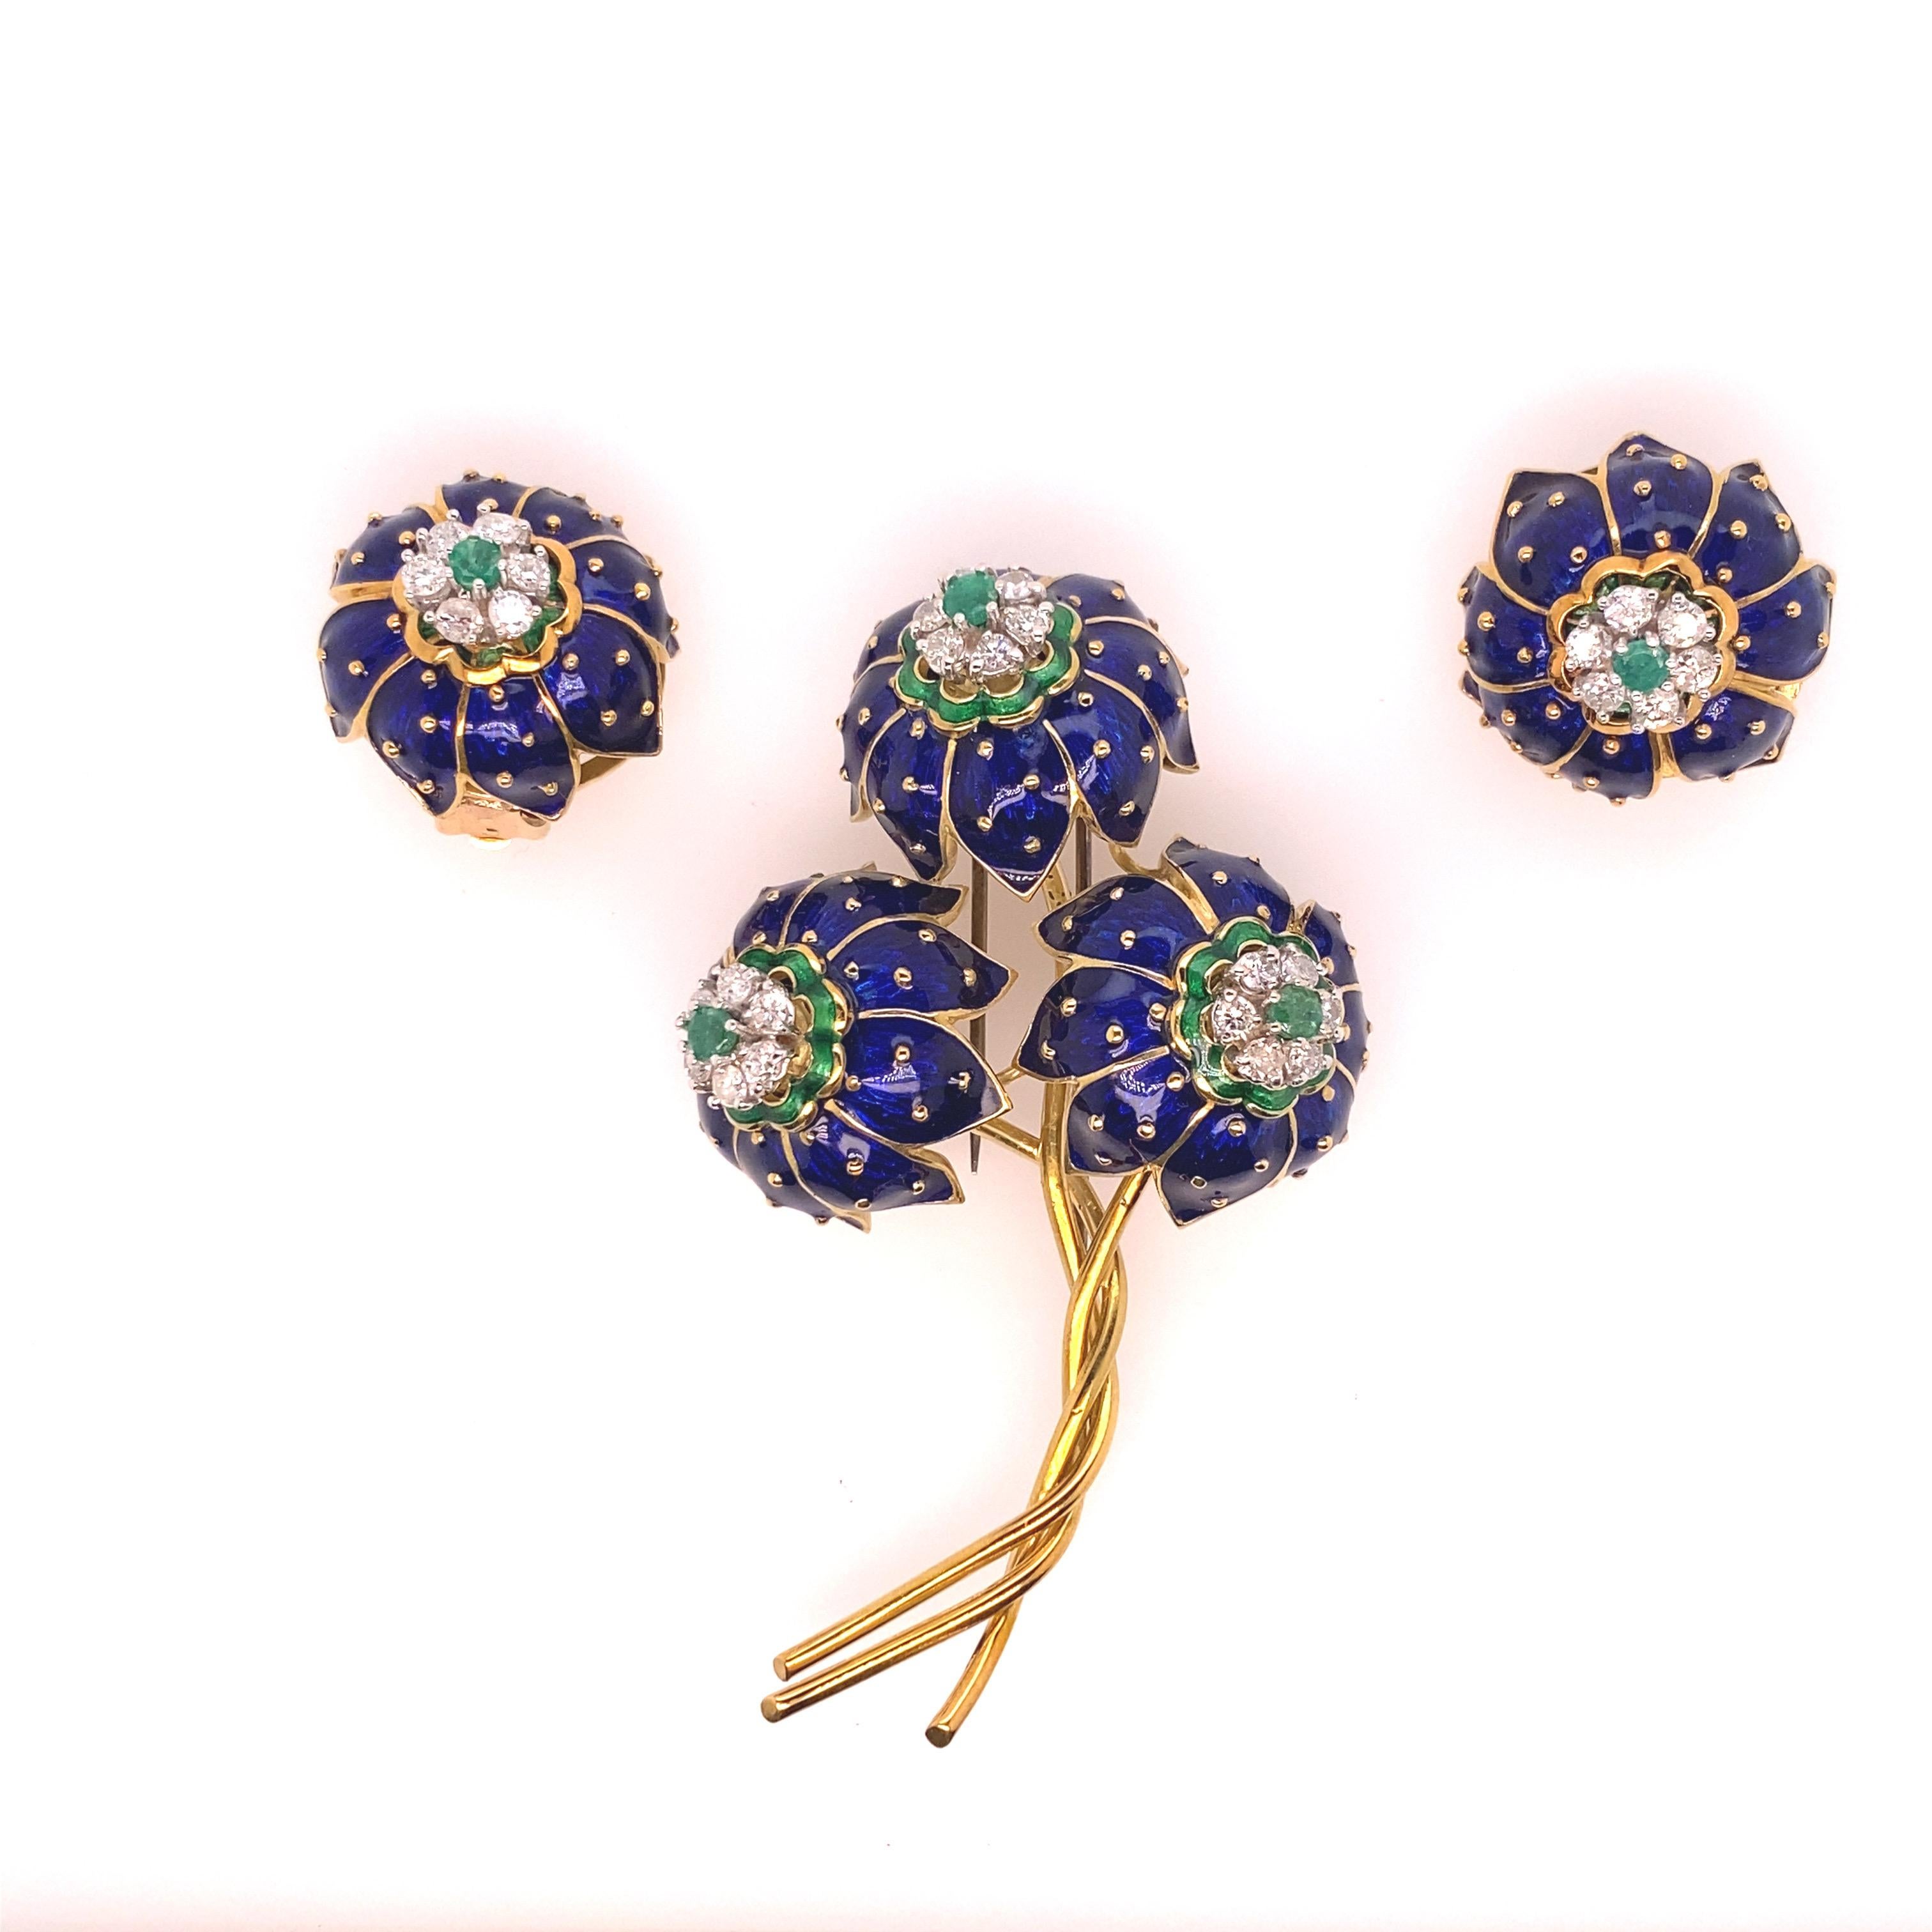 This vintage Giovanni Corletto brooch, from Venice Italy is a stunner.  It is in fabulous condition with all enamel intact.  The House of Corletto is known for exceptional designs and enamel work.  Each a true one of a kind.  This blue enamel brooch